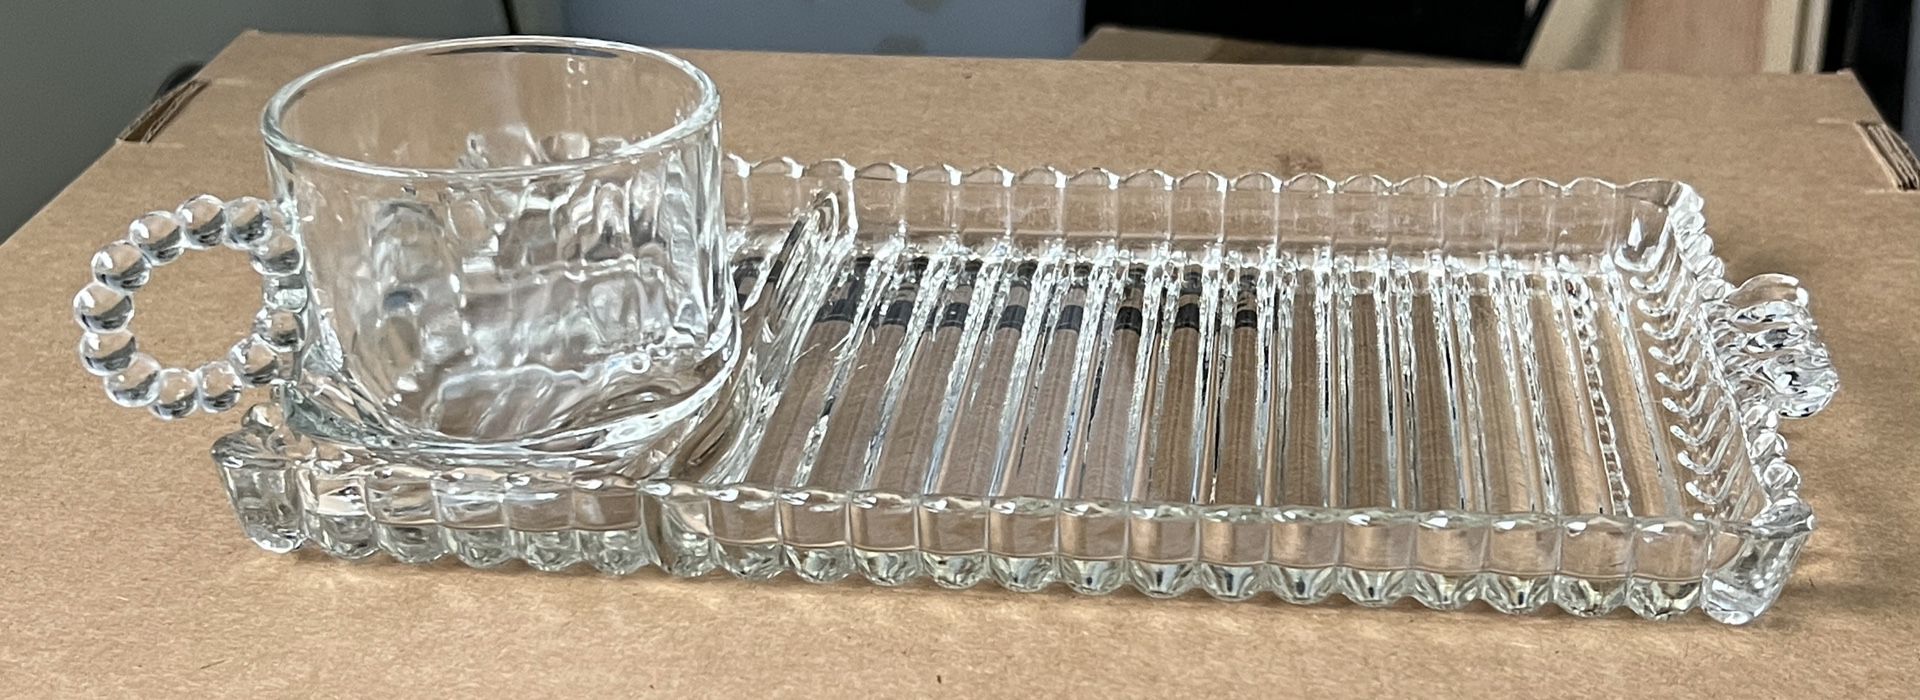 8 Vintage Hazel- Atlas Orchard Glass Crystal  Sip, Snack, Smoke Trays With Cups!